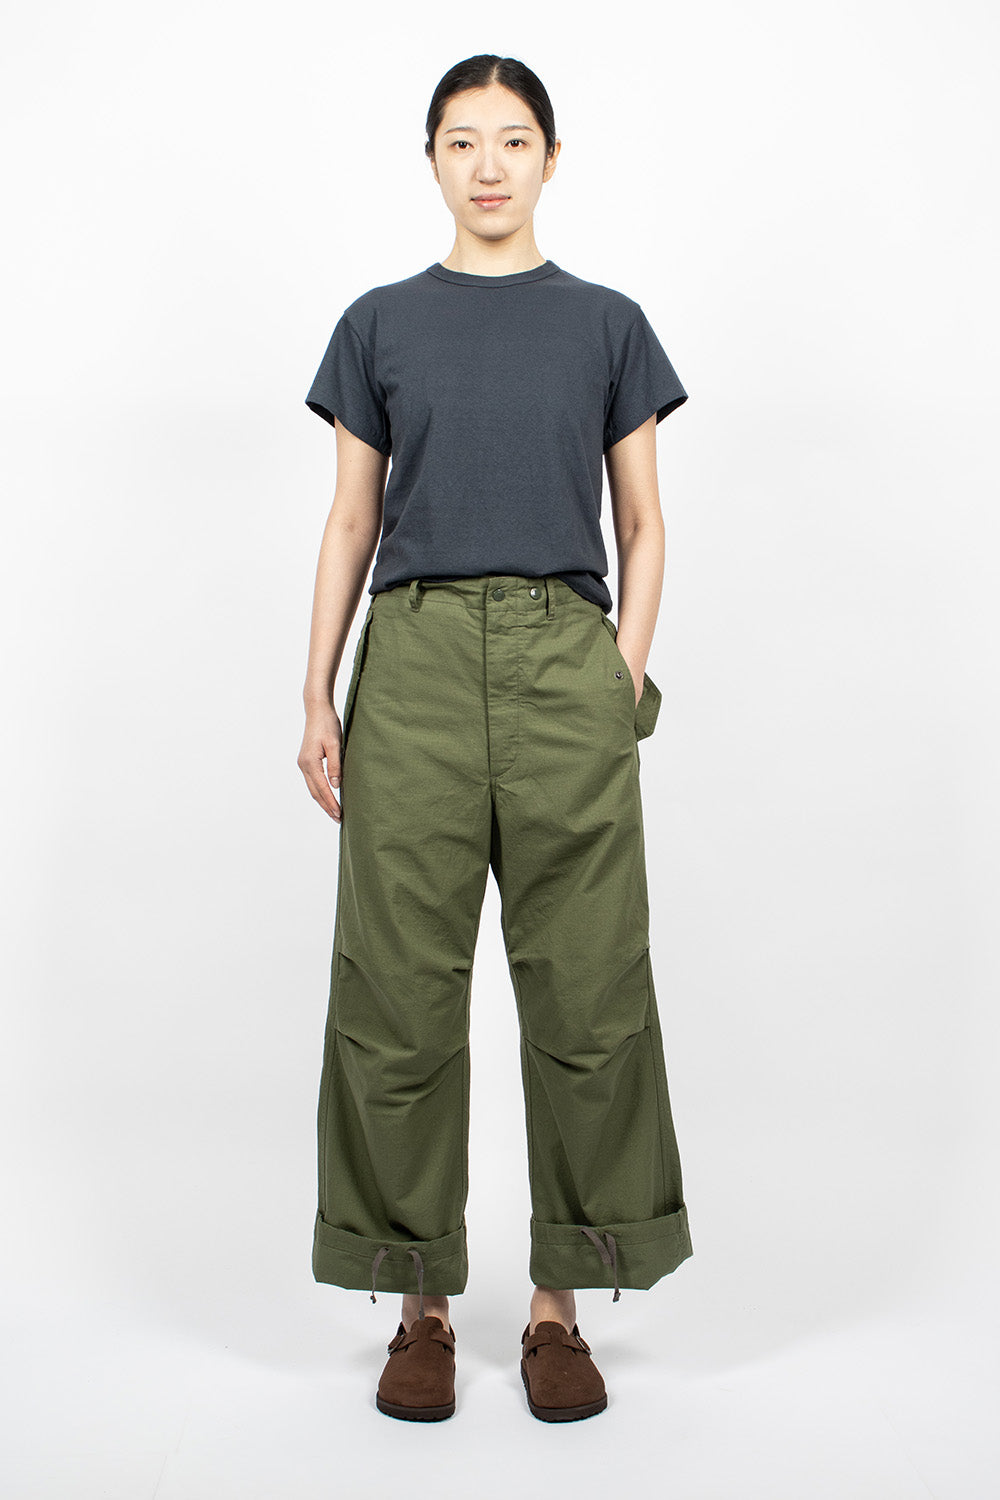 Over Pant Olive